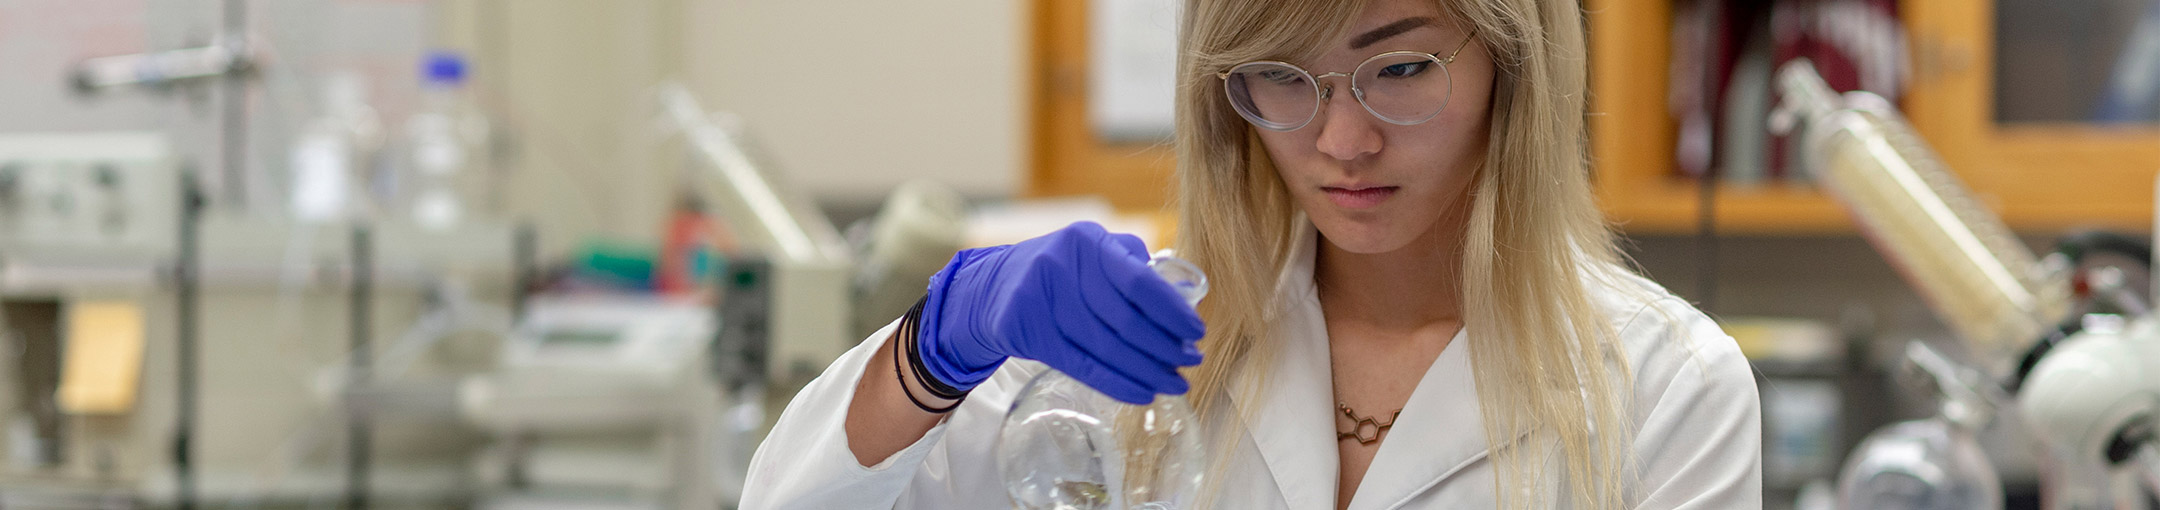 A purple-gloved students looks at the contents of a beaker.